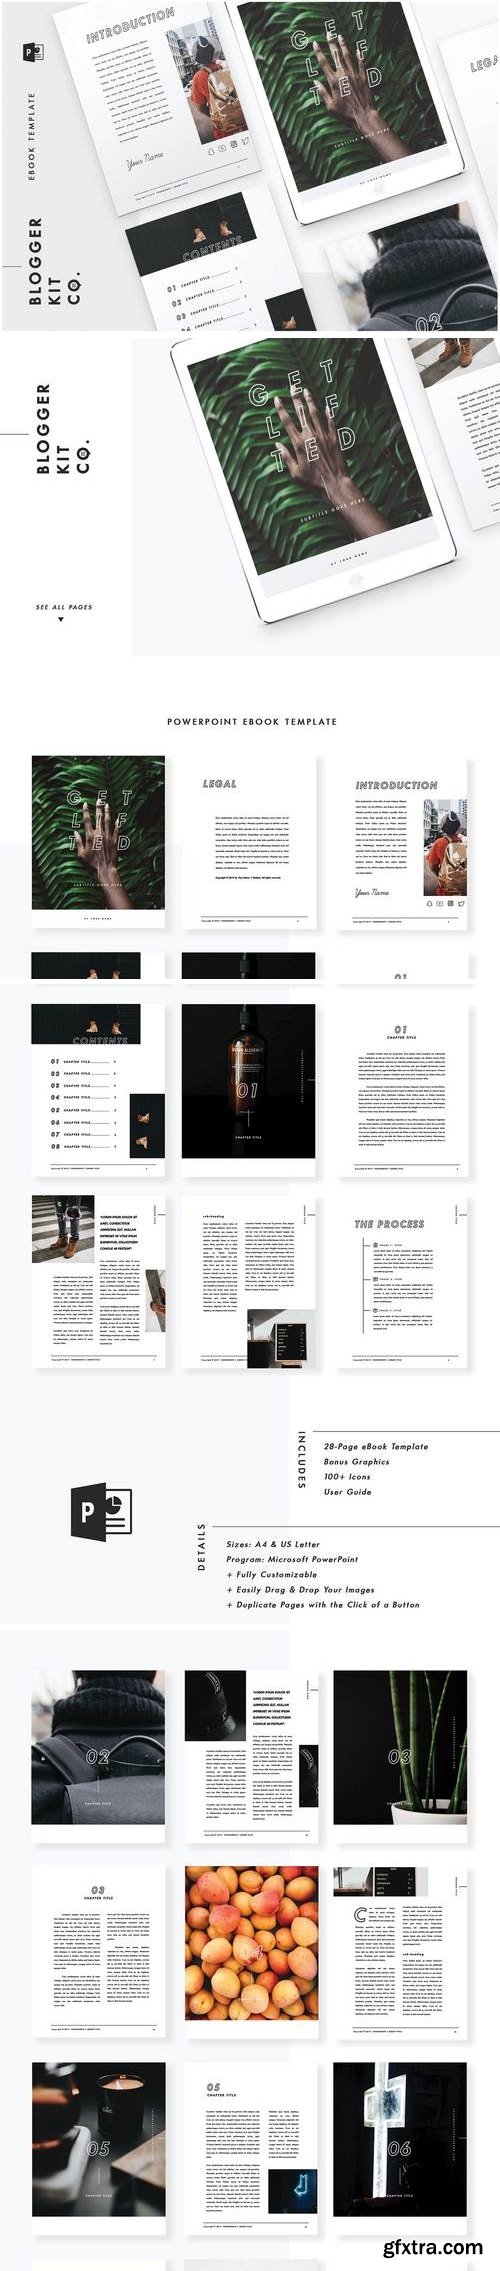 eBook Template | 28 Pages| PowerPoint